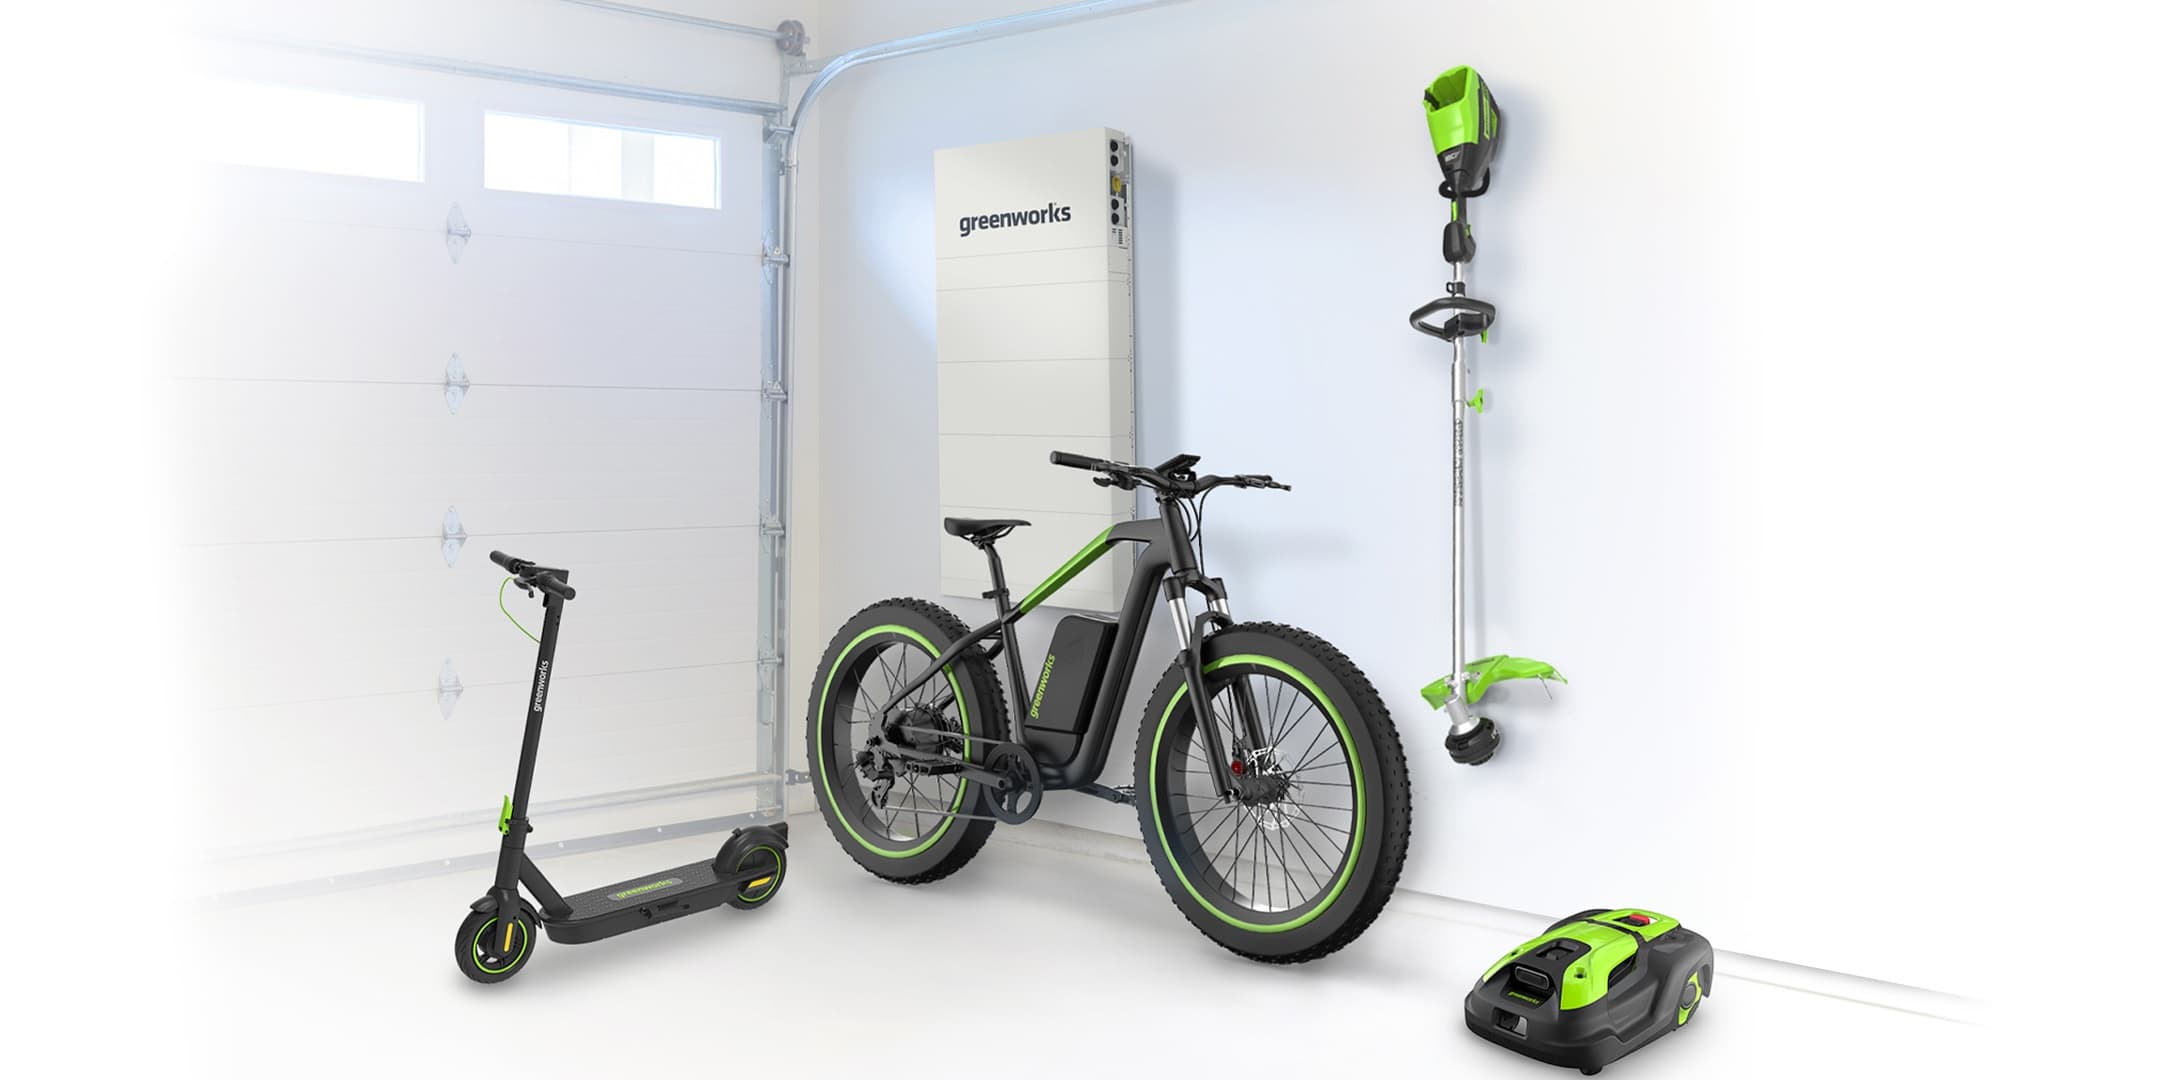 Greenworks unveils home battery, electric bikes, mowers, and more